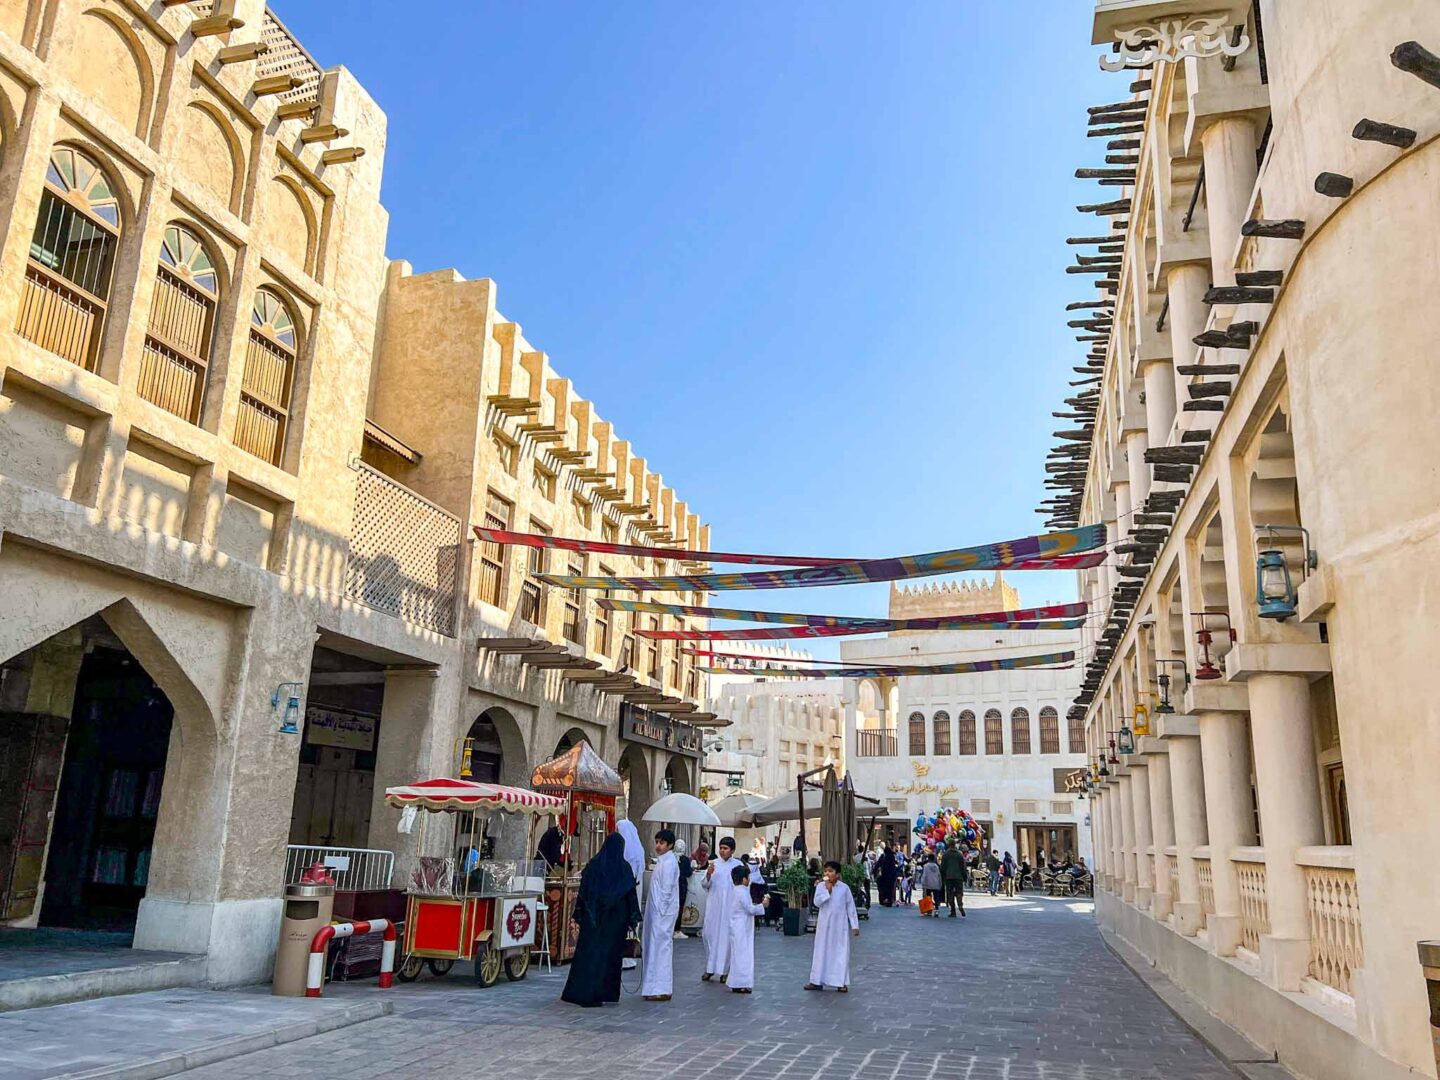 Family in traditional clothing in Souq Waqif, Qatar dress code, what to wear in Qatar,